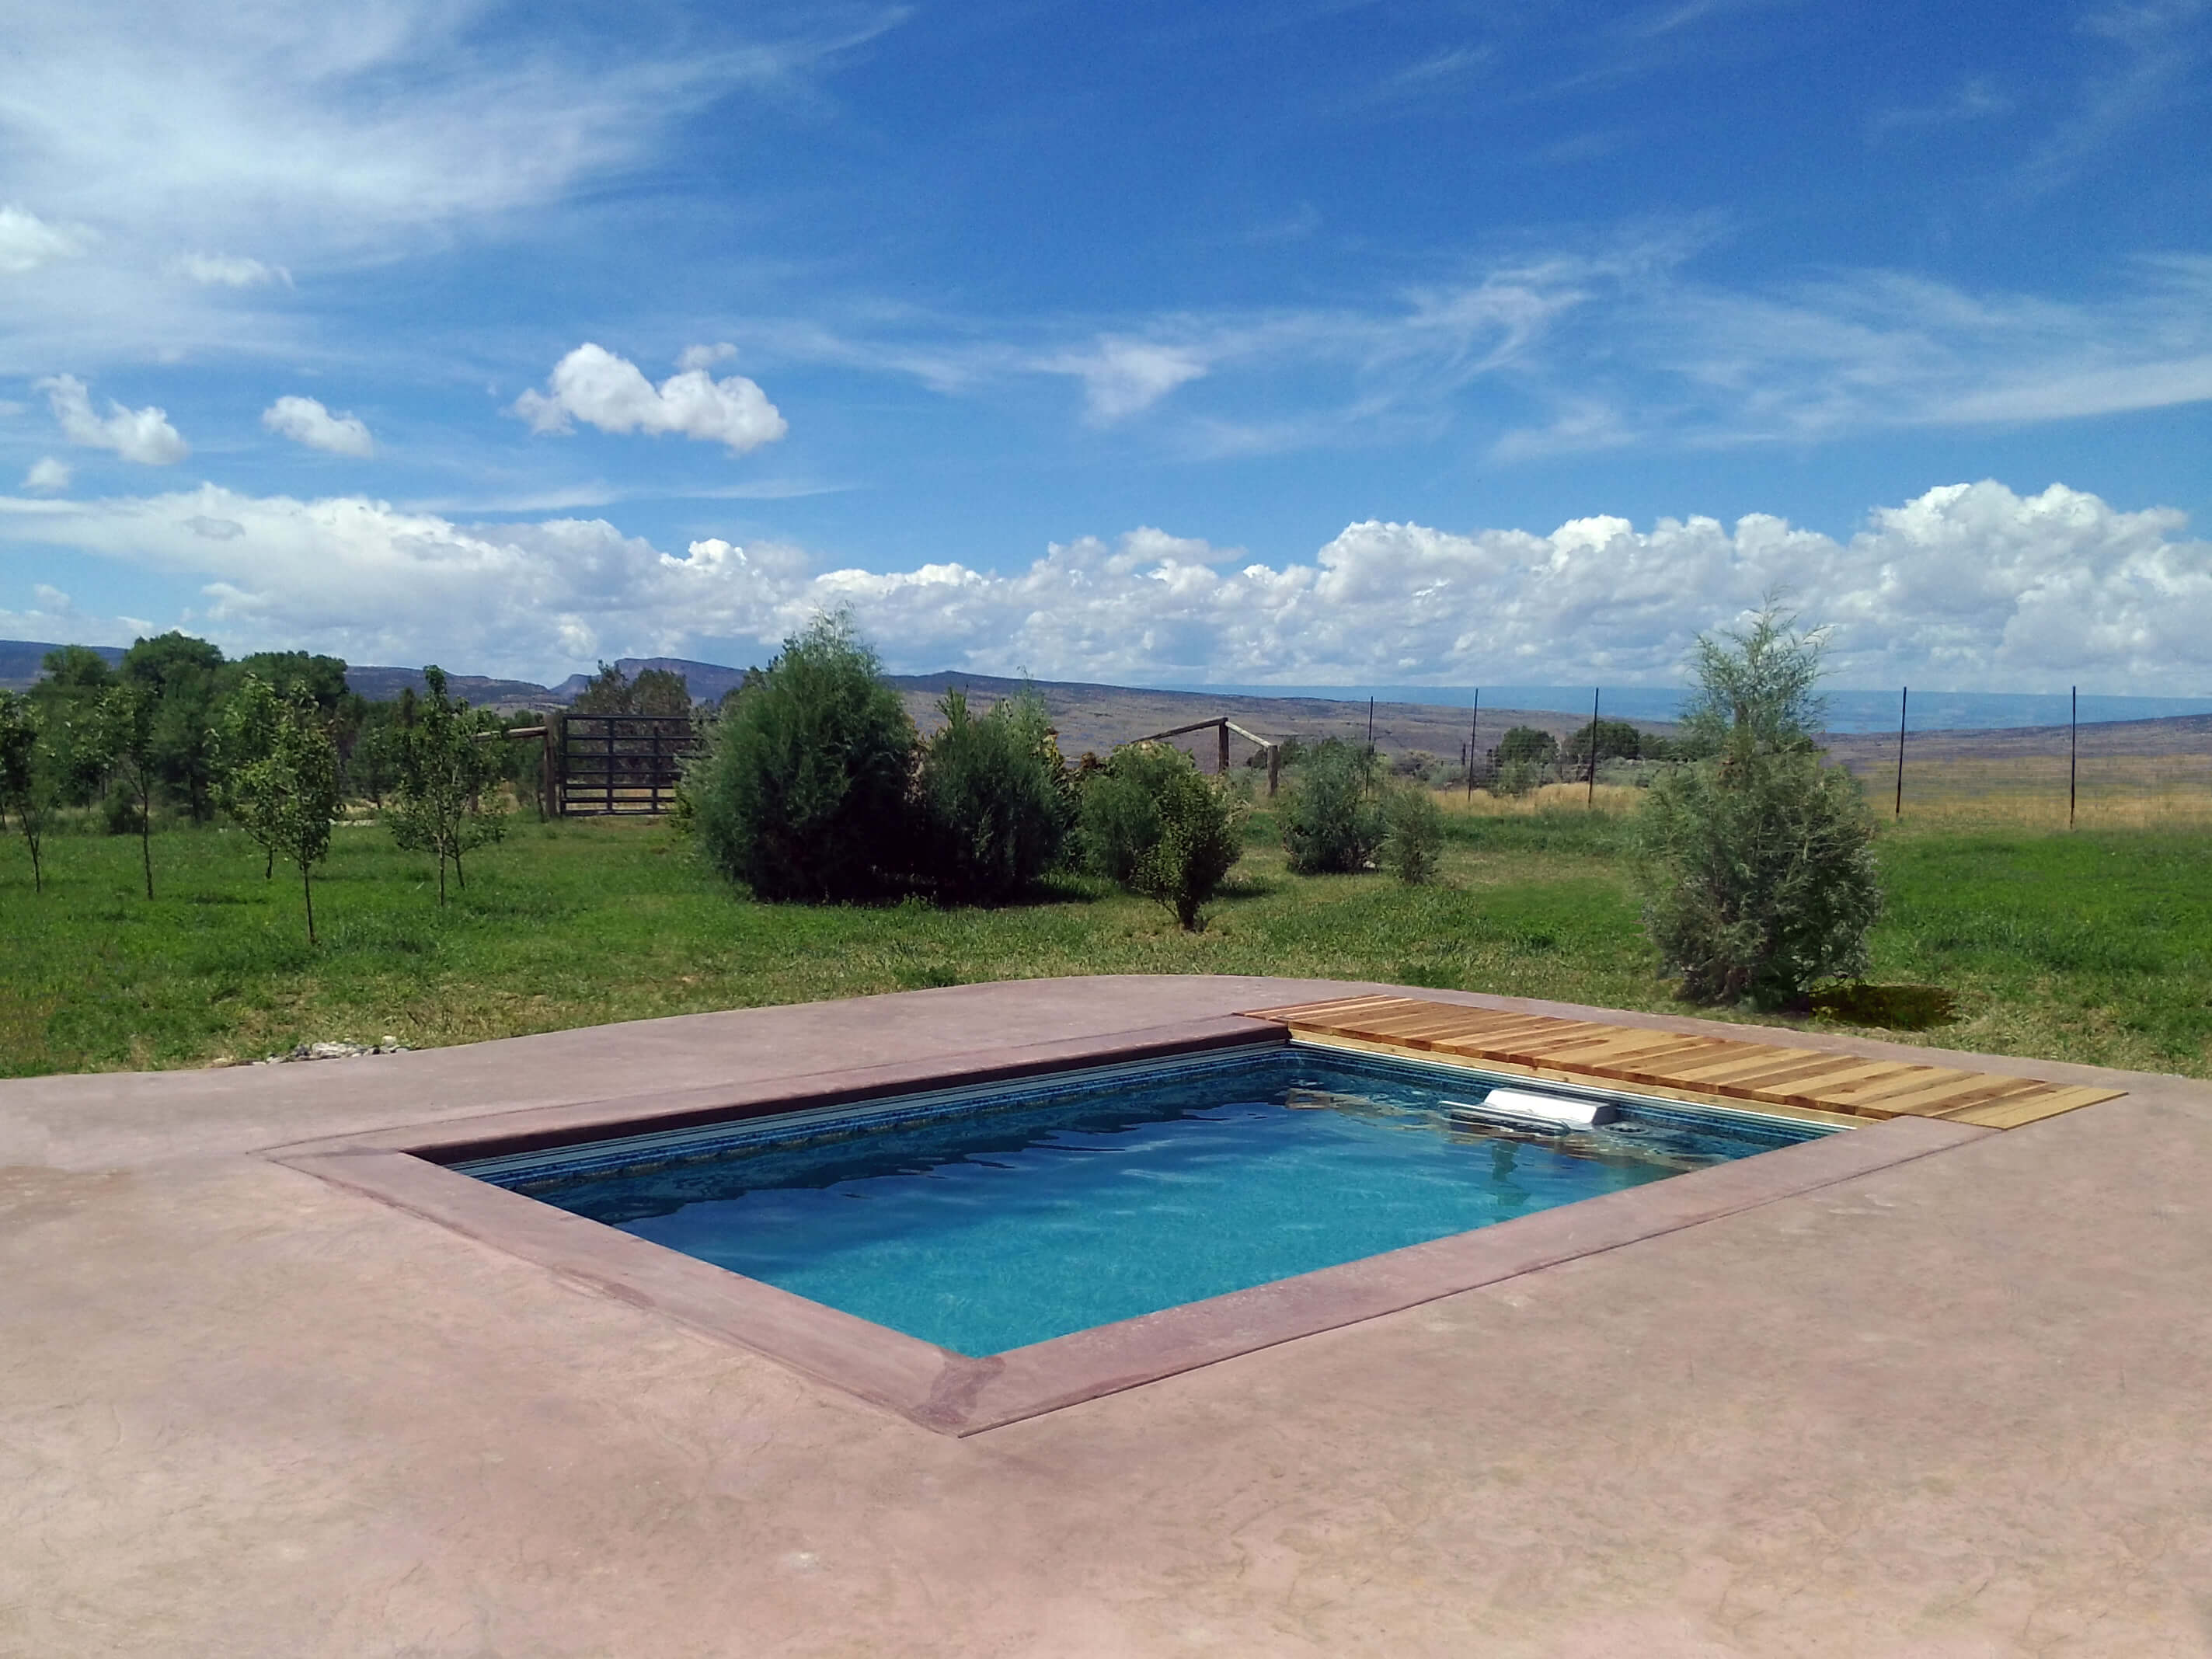 a fully in-ground Endless Pool outdoors in Colorado.